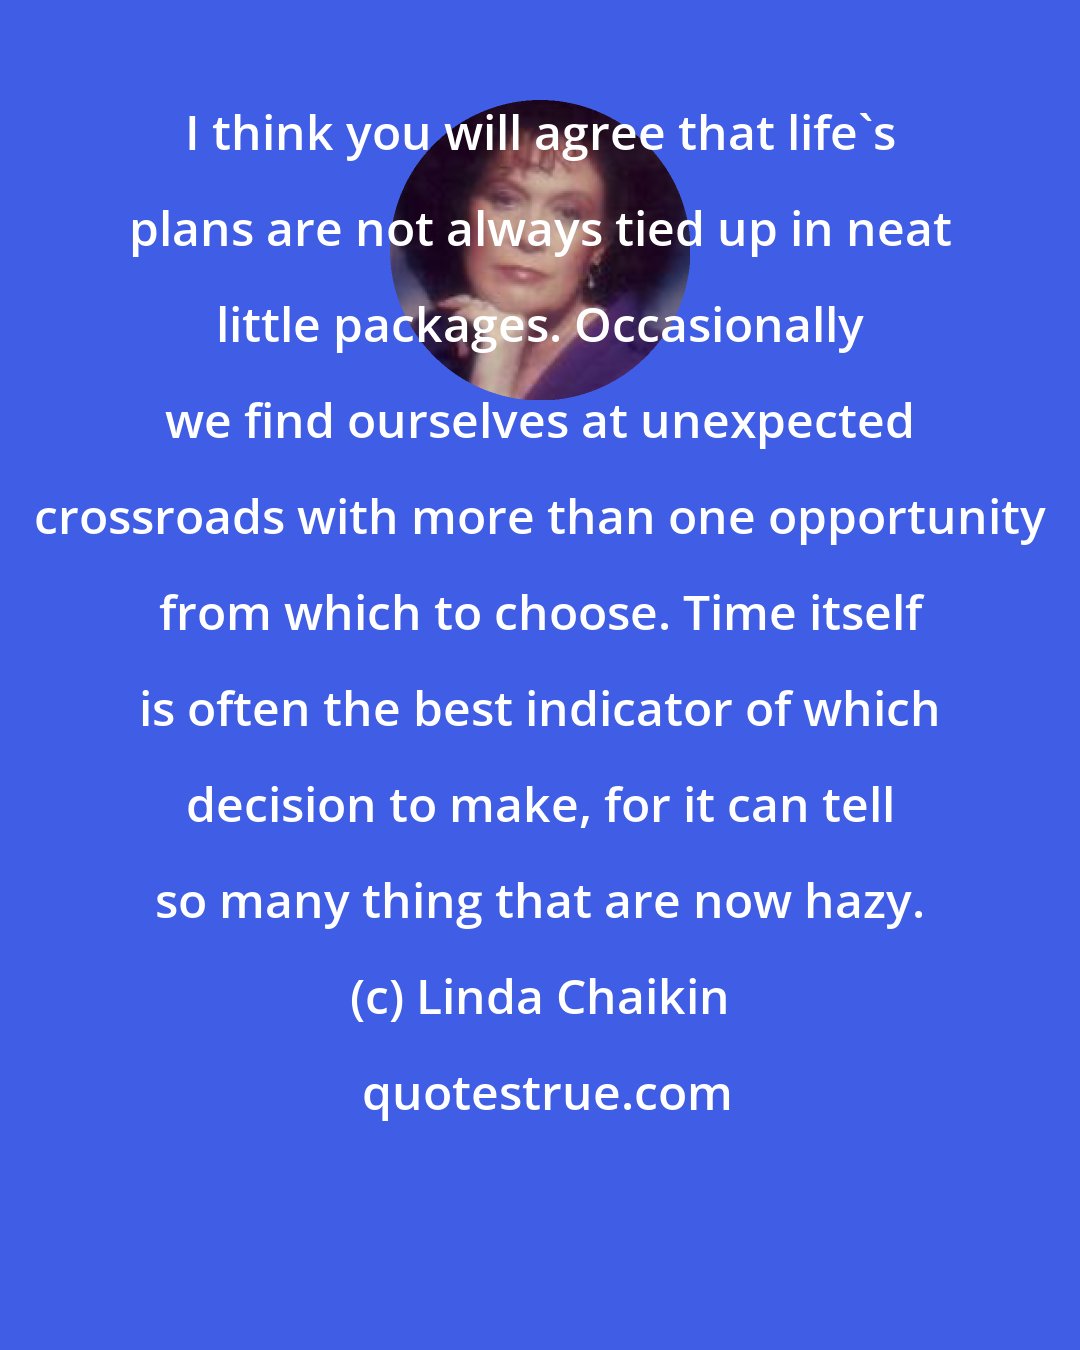 Linda Chaikin: I think you will agree that life's plans are not always tied up in neat little packages. Occasionally we find ourselves at unexpected crossroads with more than one opportunity from which to choose. Time itself is often the best indicator of which decision to make, for it can tell so many thing that are now hazy.